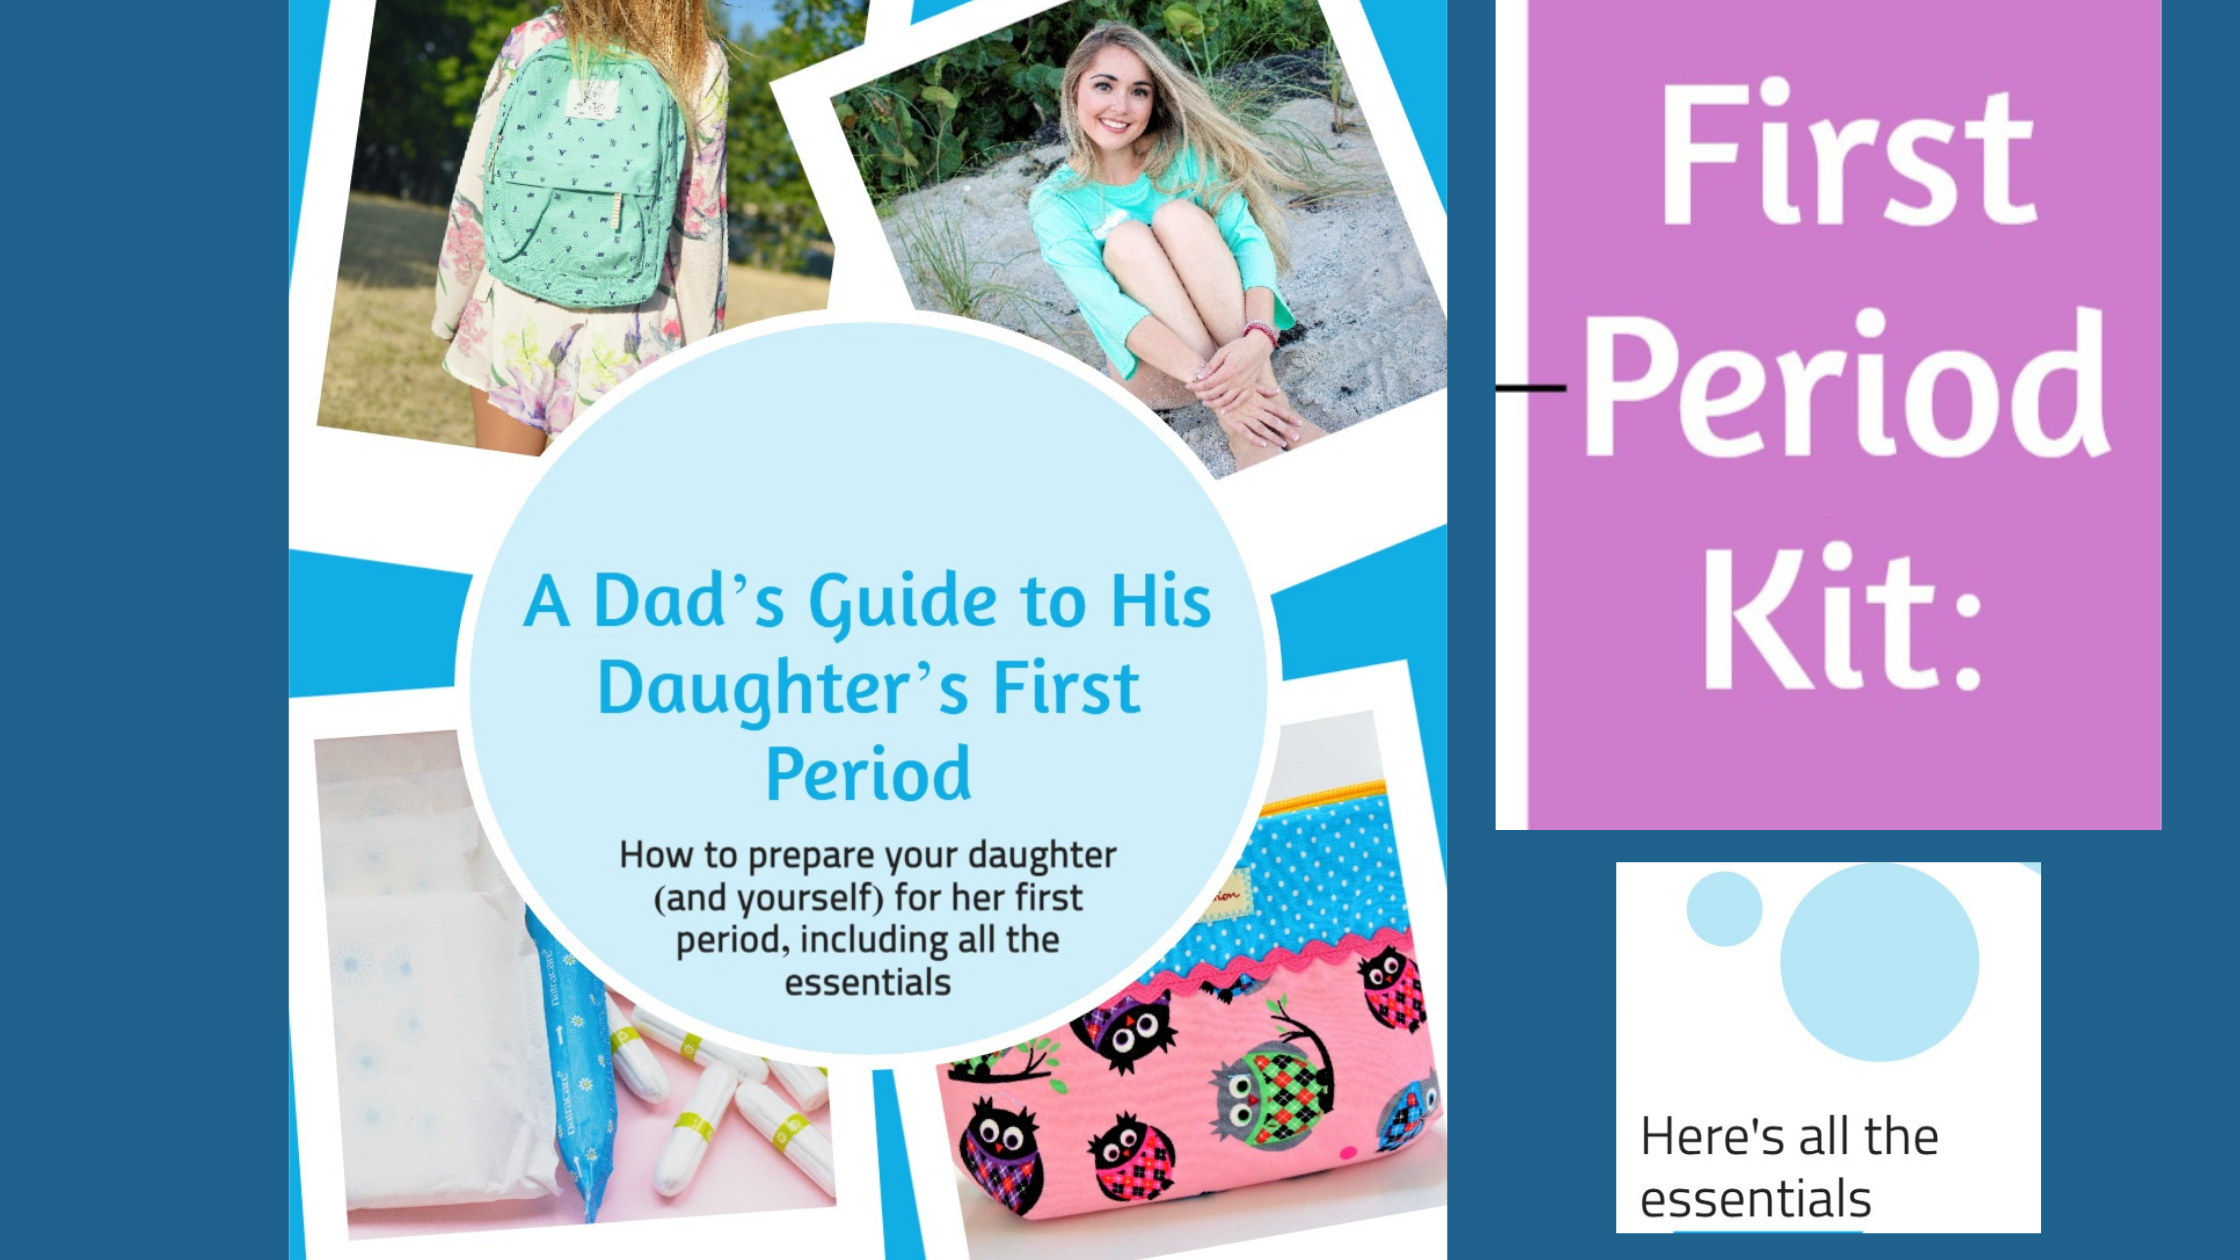 D.I.Y. first-period kit, first period kit, first period, signs your daughter is about to start her period, period kit, first period signs, first time period, girls first period, period starter kit, my first period, period kit for girls, my first period kit, 1st period, first menstruation, first menstrual cycle, girls first period kit, daughter's first period, first-period box, first periods, first period kits for tweens, period starter pack, daughter's first period kit, 1st period kit, first period guide for dads